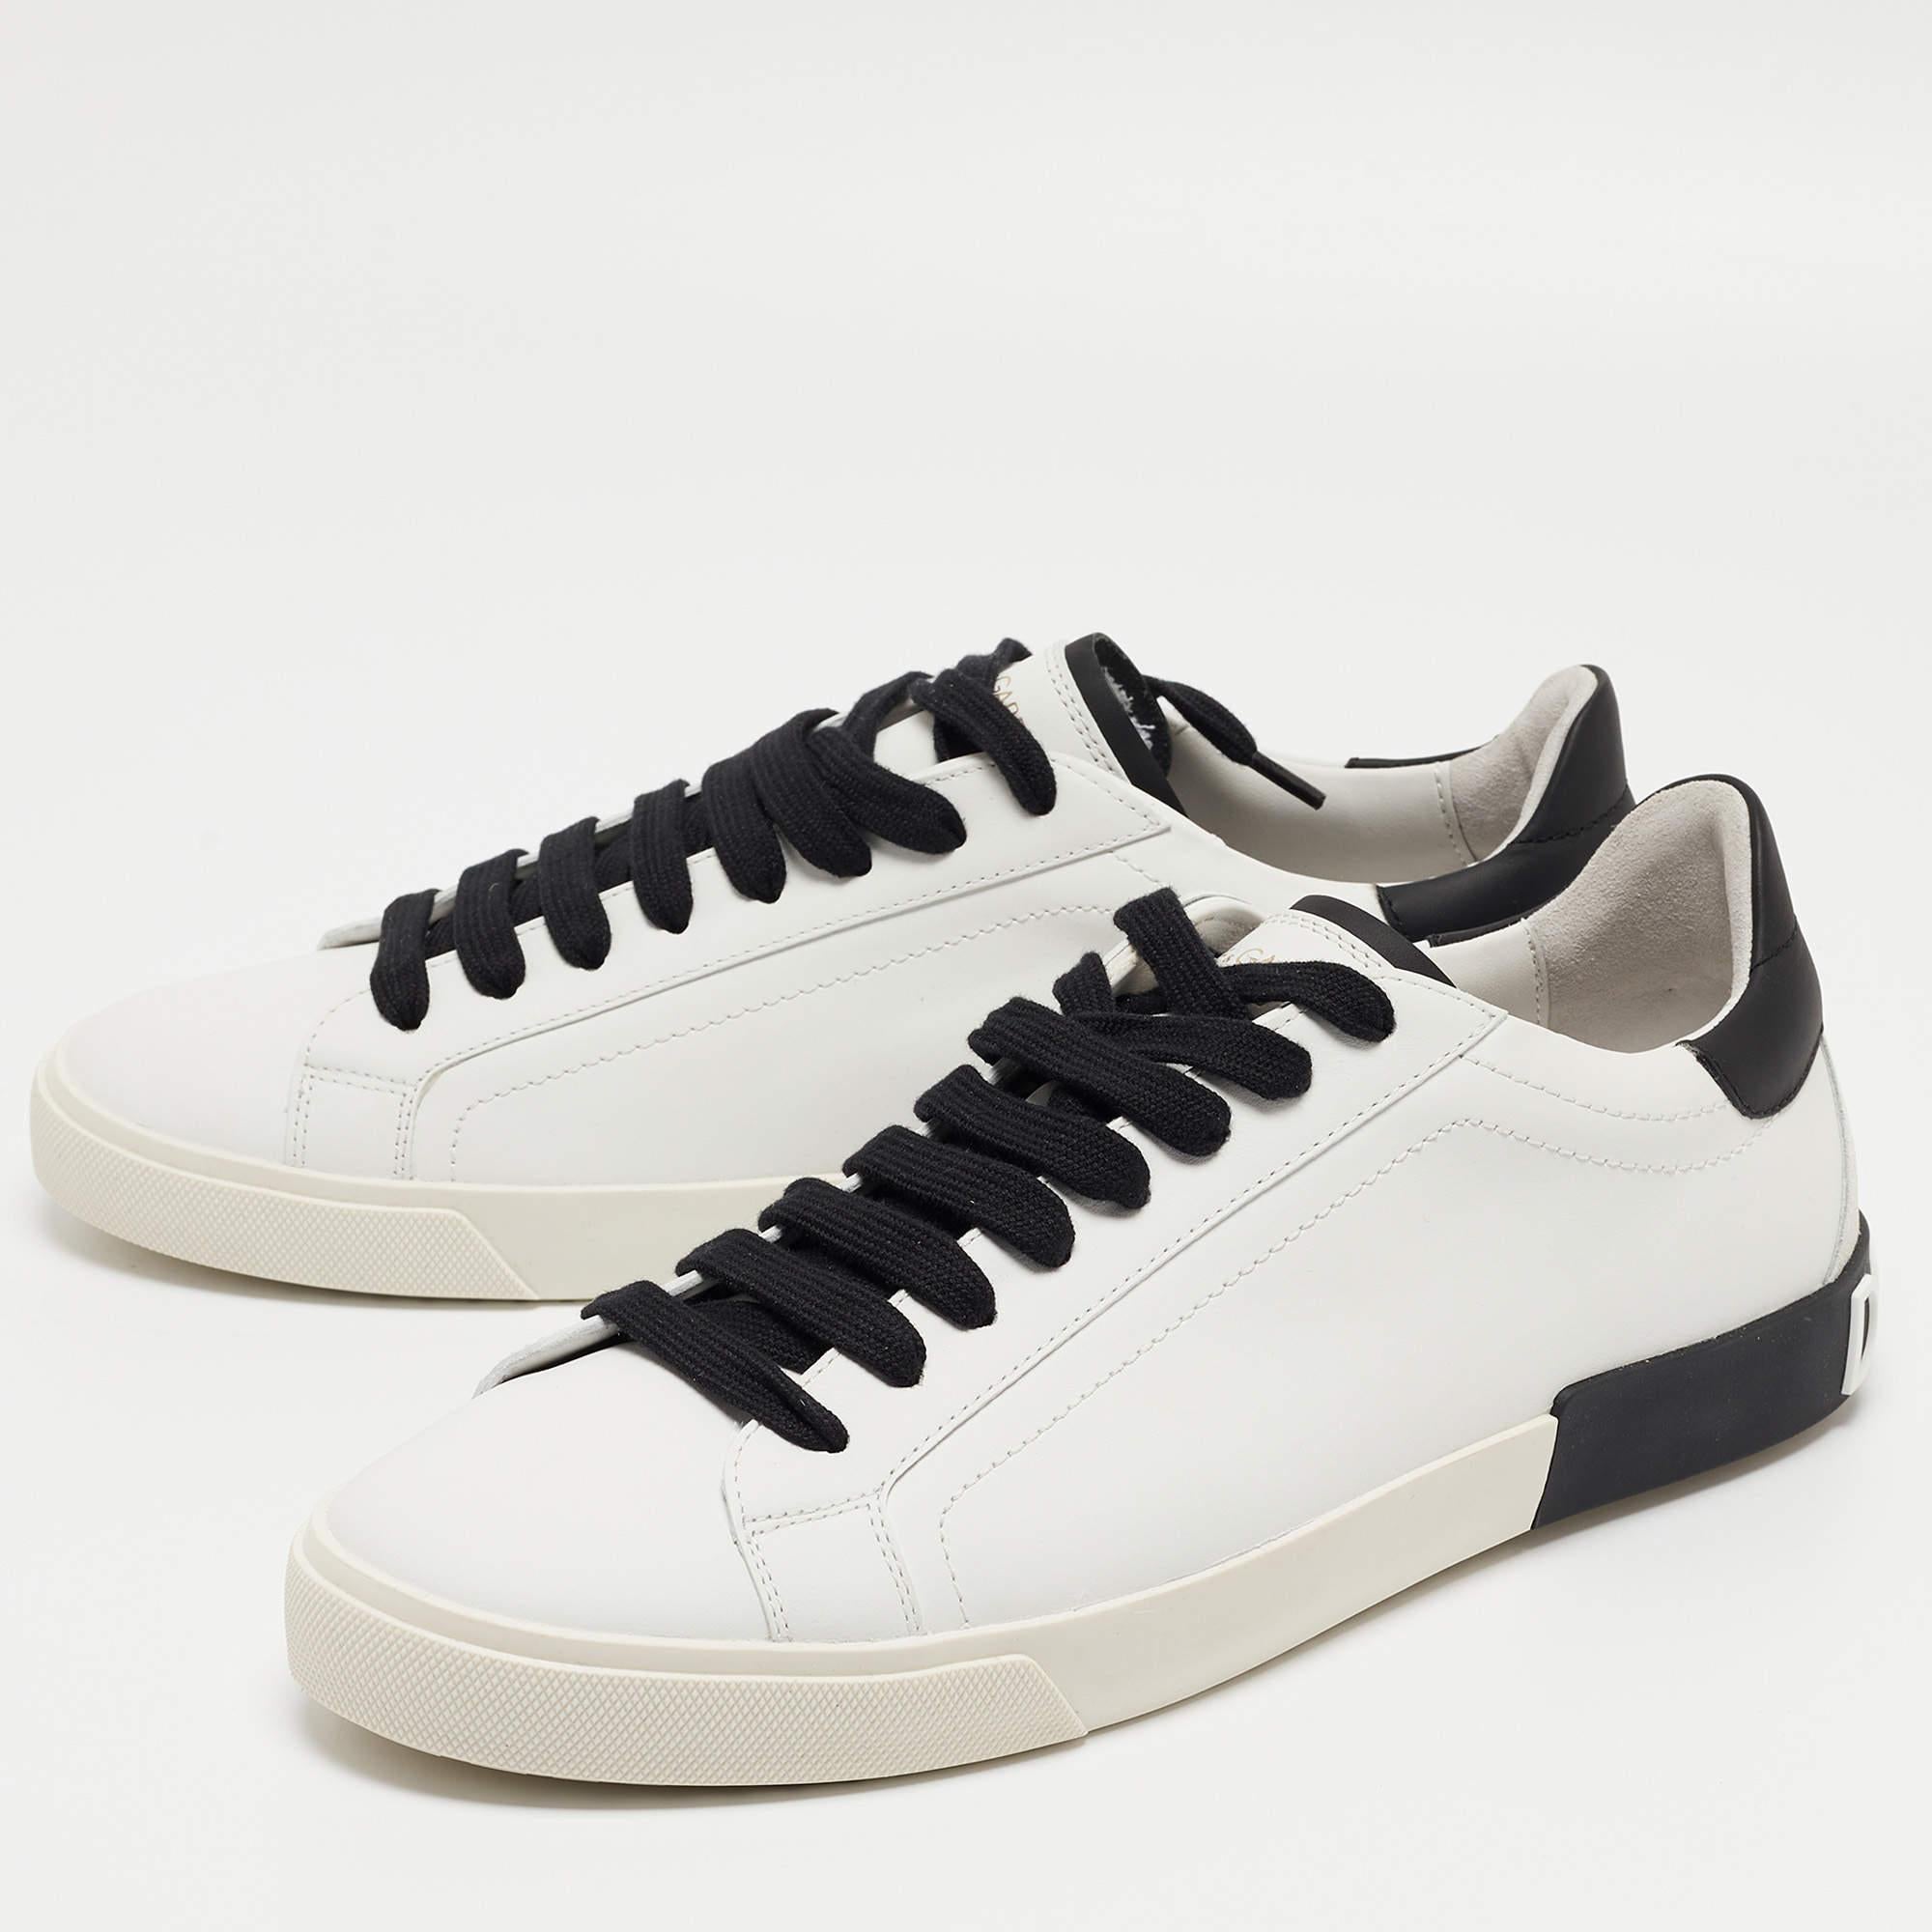 Dolce & Gabbana White/Black Leather Low Top Sneakers Size 45 1